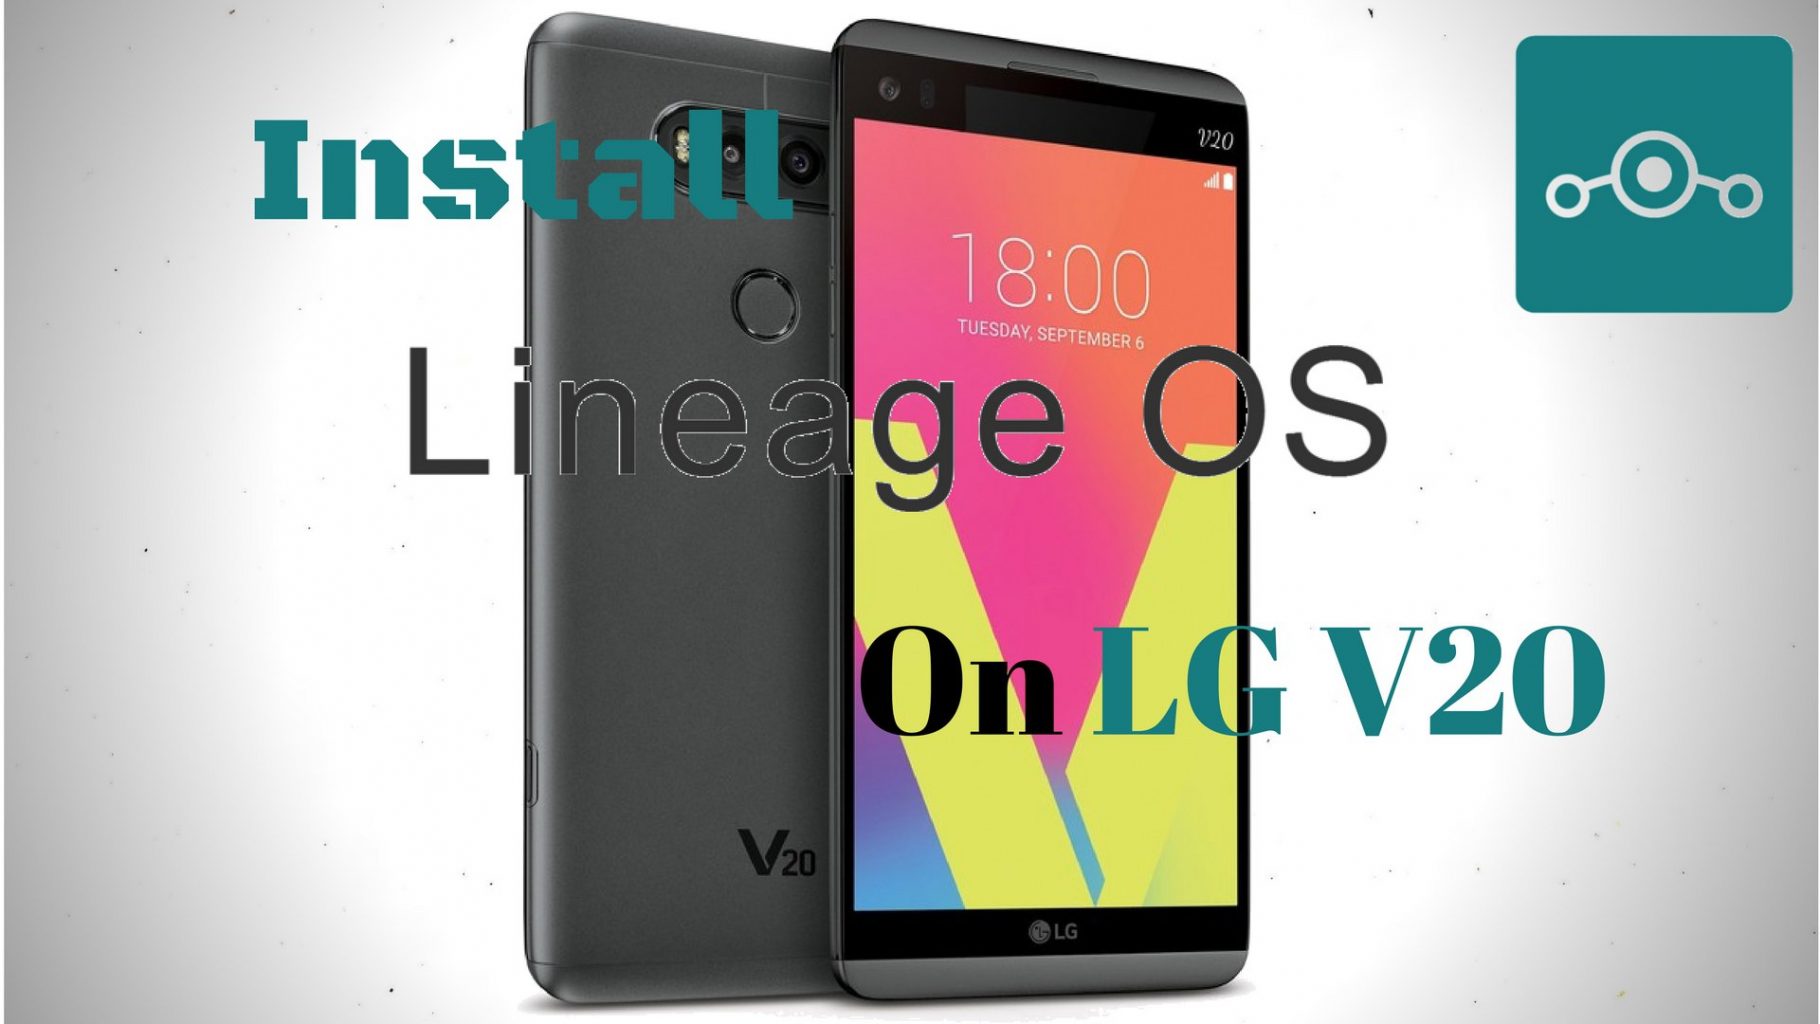 Lineage OS on LG V20